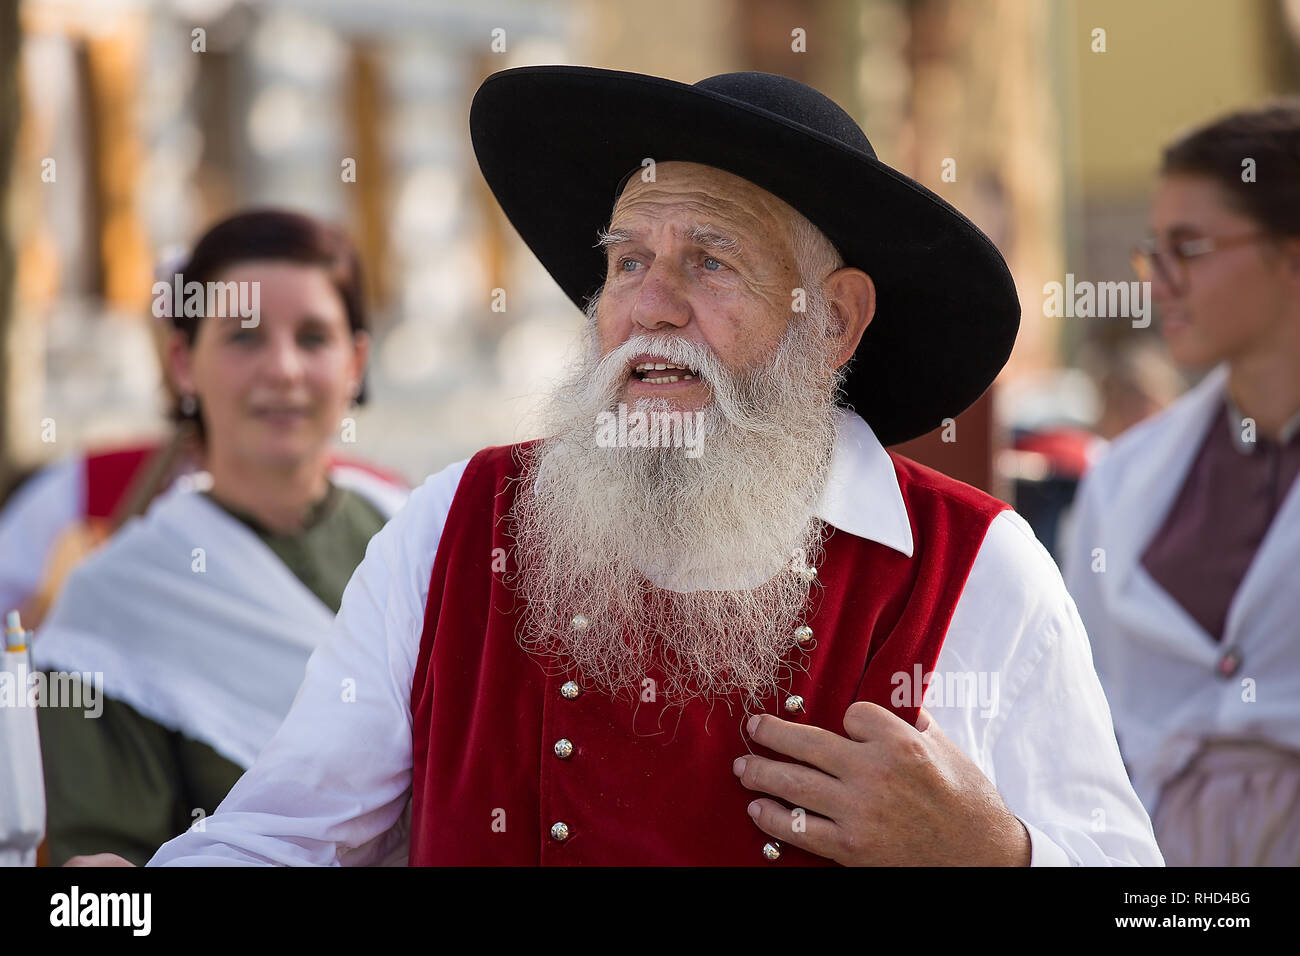 Gorizia, Italy - August 27, 2017: Old man in traditional costume in the town street during the International Folklore Festival in Gorizia, Italy Stock Photo